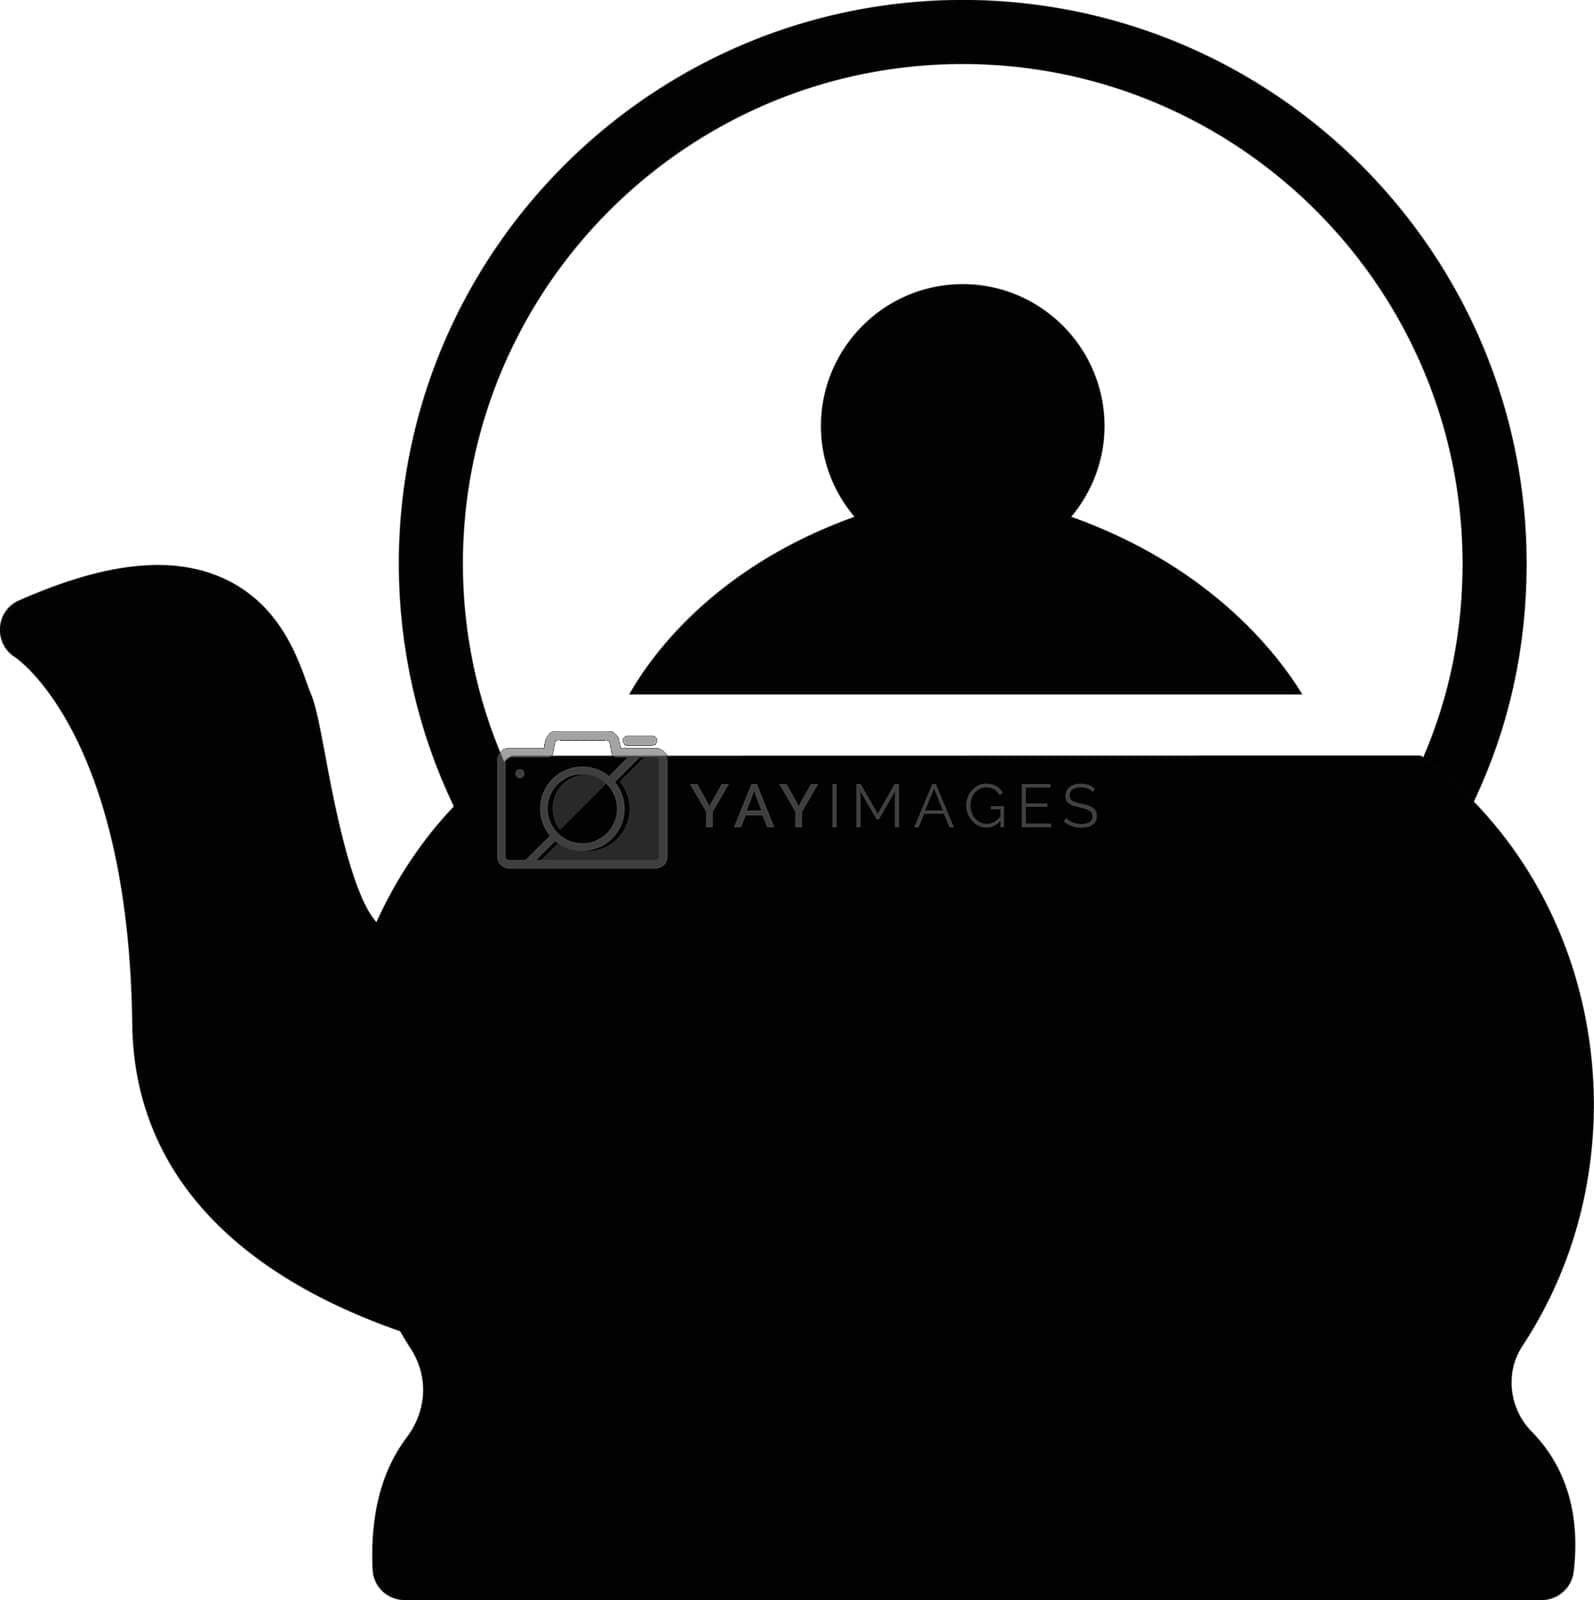 Royalty free image of kettle by FlaticonsDesign